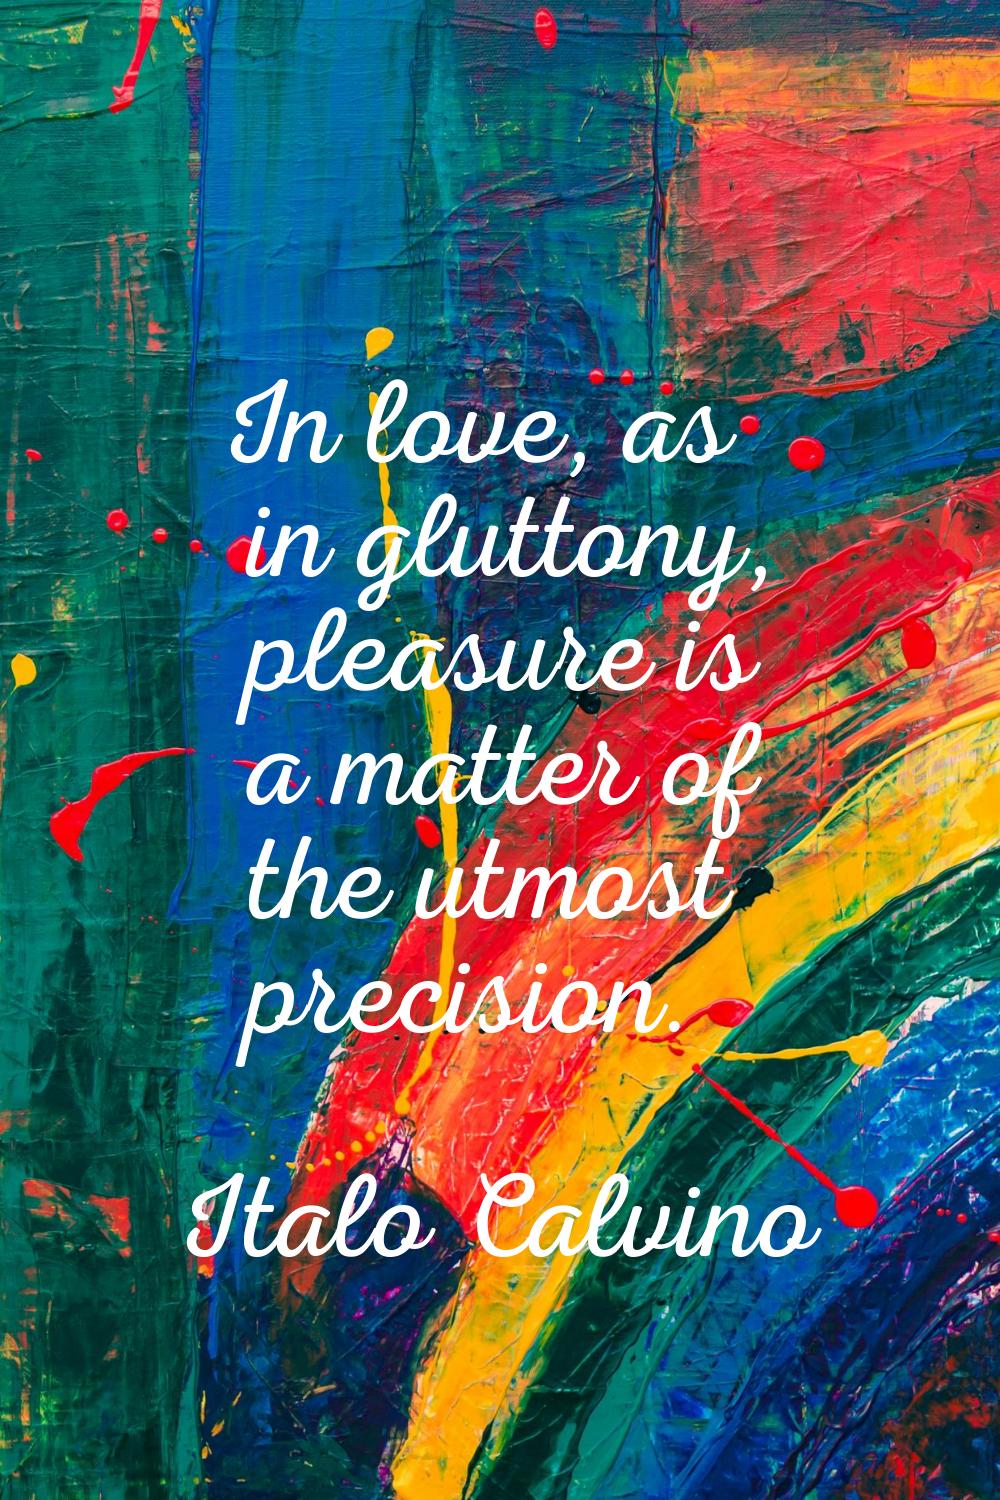 In love, as in gluttony, pleasure is a matter of the utmost precision.